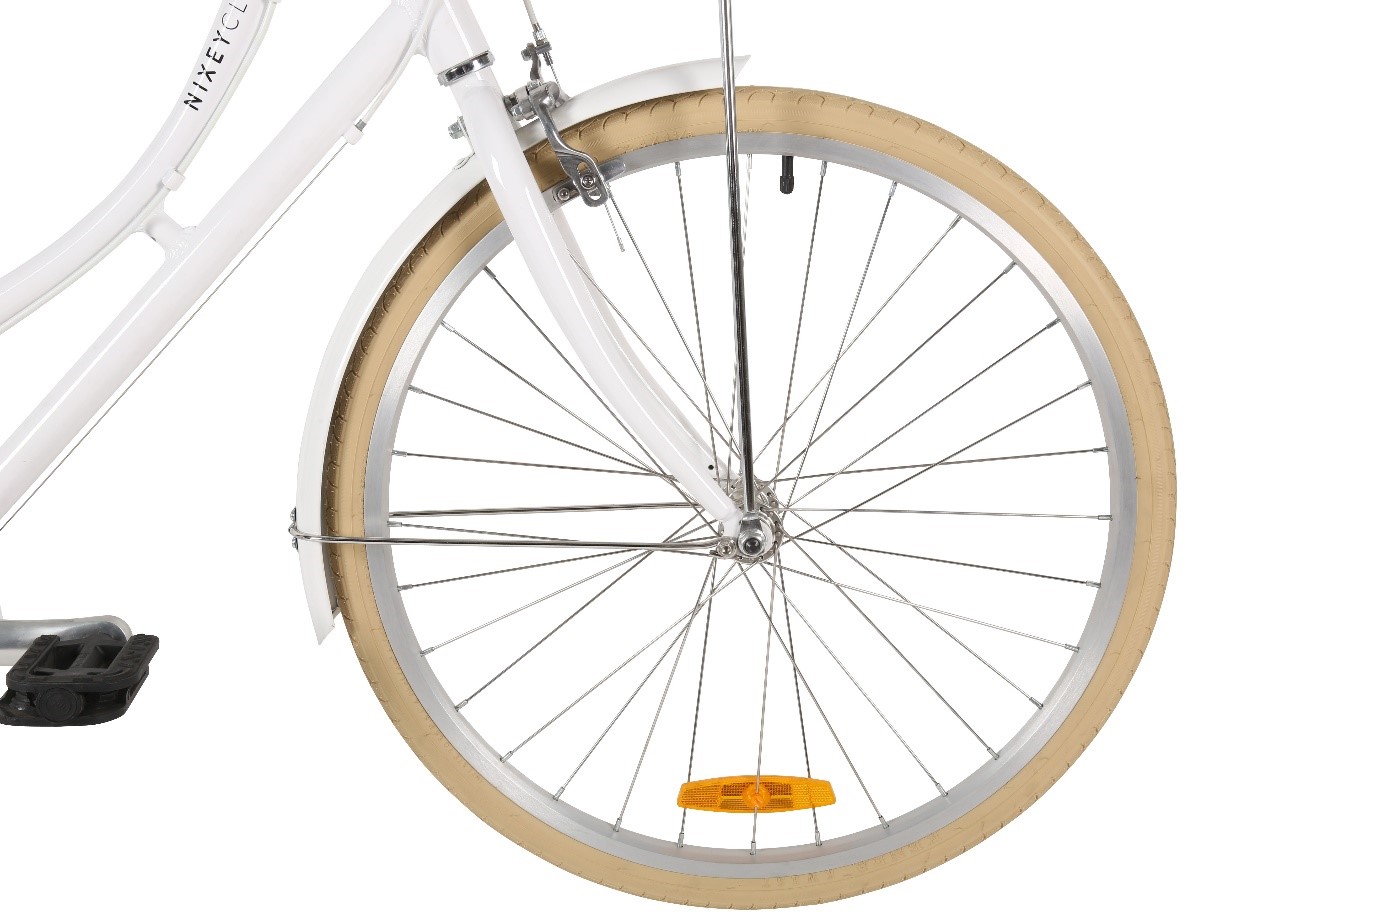 https://nixeycles.com.au/Site/wp-content/uploads/2019/04/kenda-kwest-tyres-with-stainless-steel-spokes-and-promax-caliper-brakes.jpg